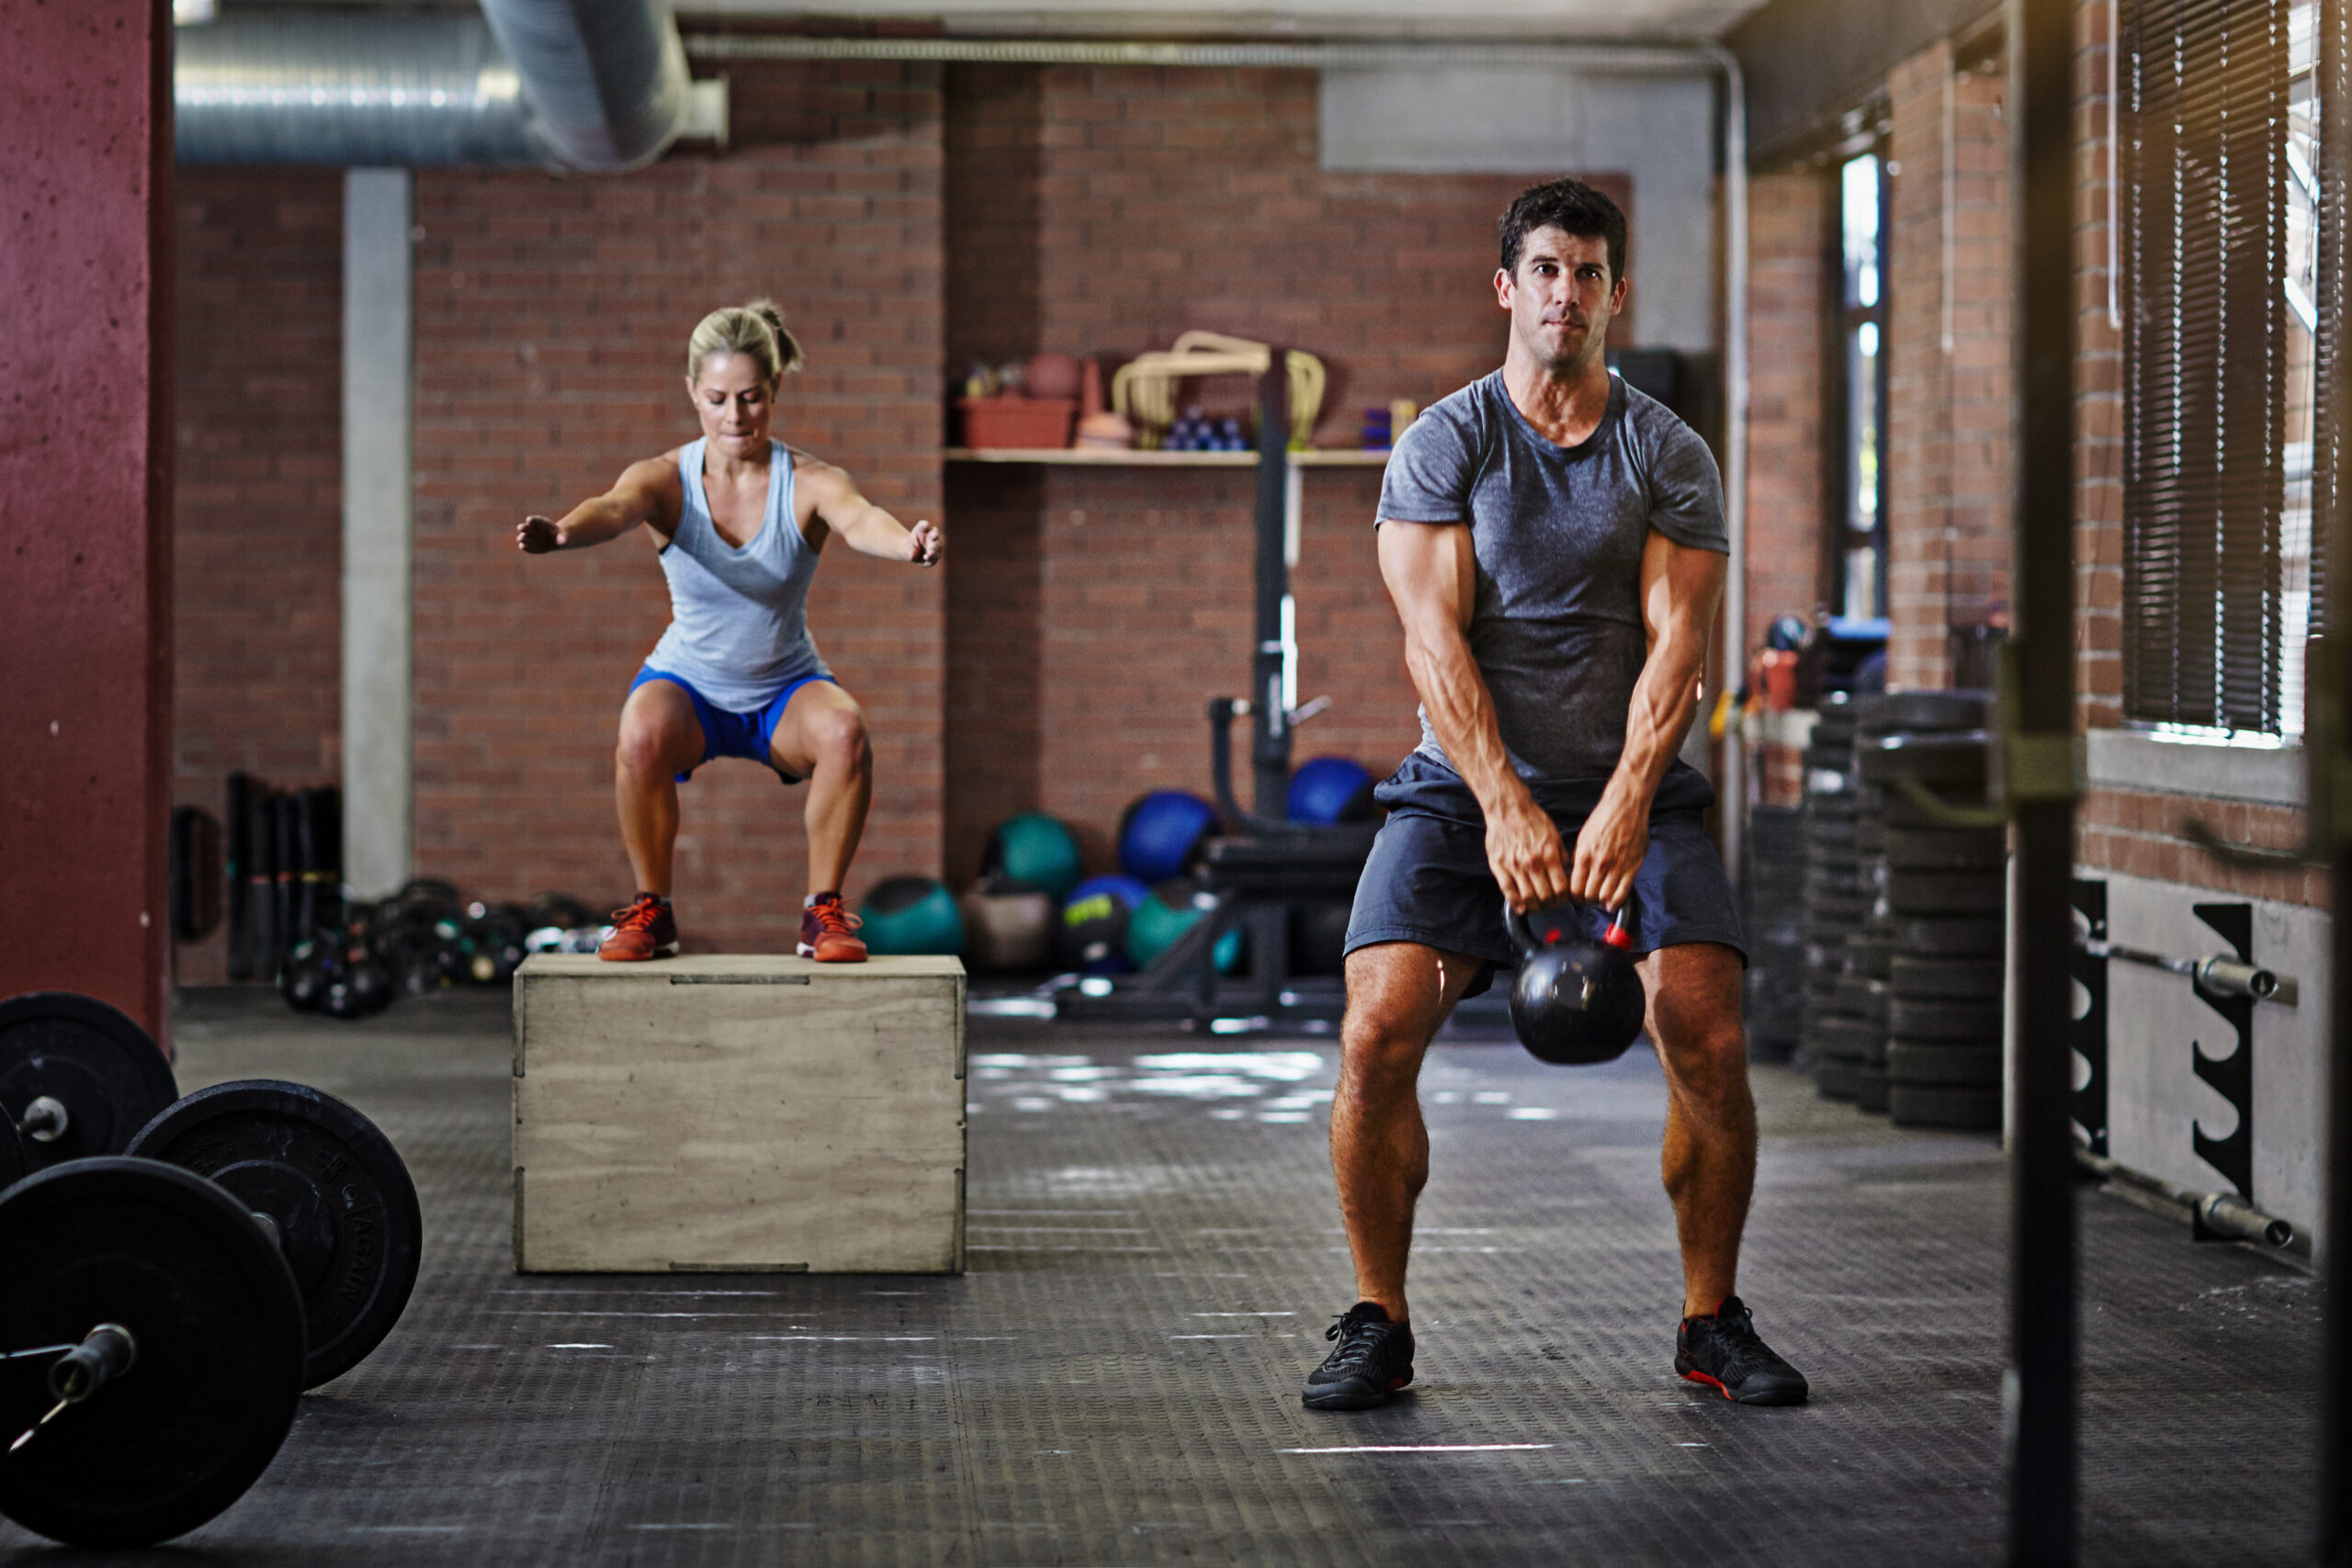 Why is Functional Fitness so fascinating?